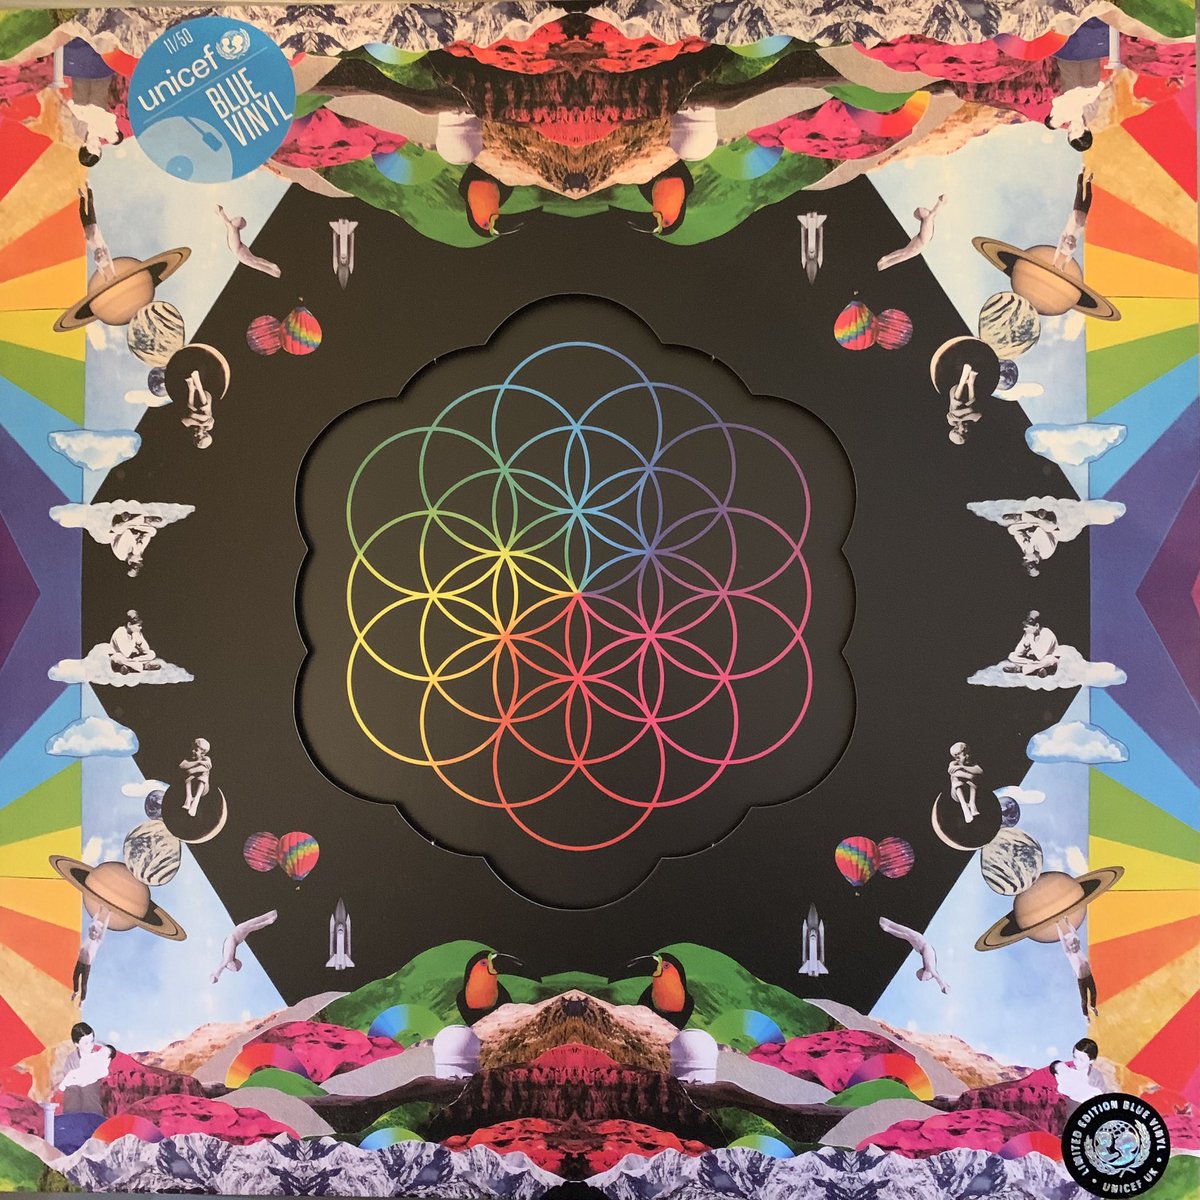 This lovely new #Coldplay vinyl arrived today. I won it in a charity draw following a donation. It’s numbered 11 and incredibly limited to 50 worldwide. The vinyl looks and sounds awesome. Very pleased with it.
A Head Full Of Dreams • Coldplay 
#unicefbluevinyl #nowplaying